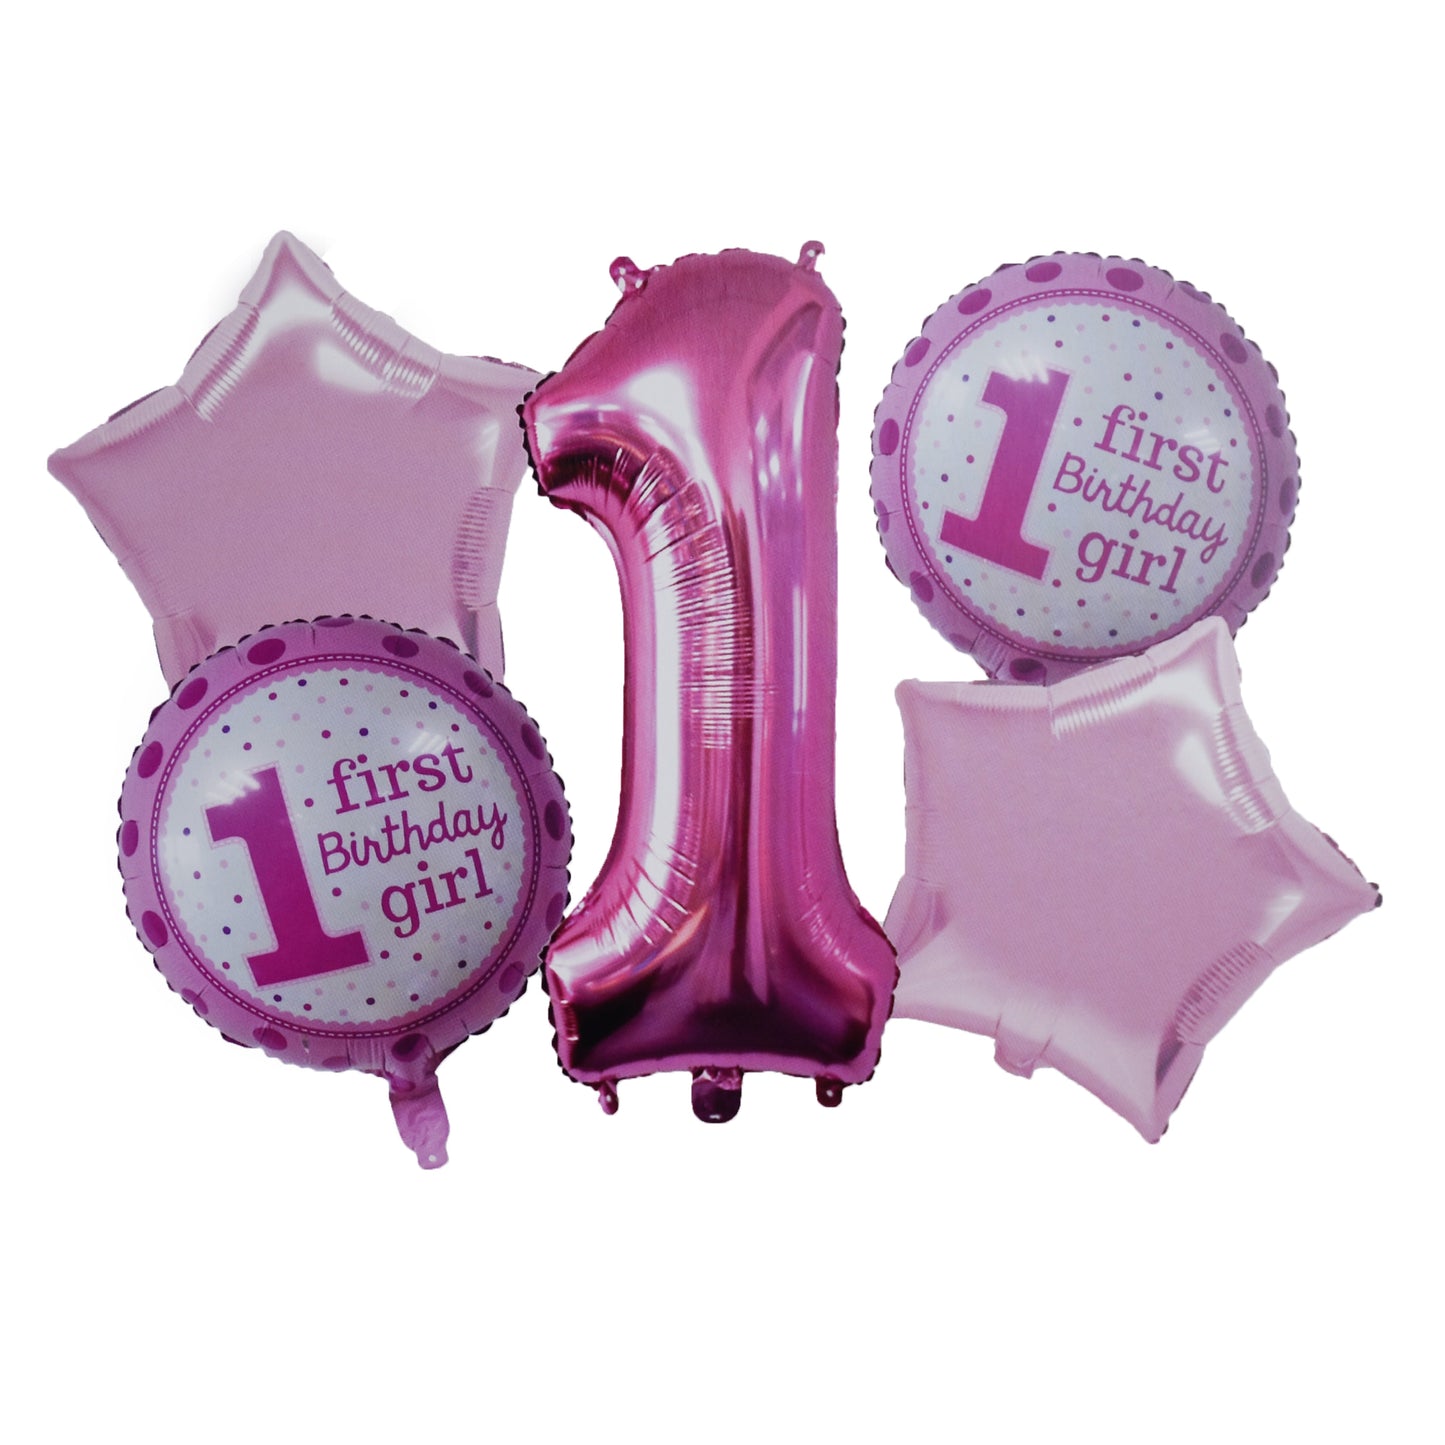 "First Birthday Girl" Pink Theme Foil Balloon 5 Pcs Set For Birthday Party Decoration